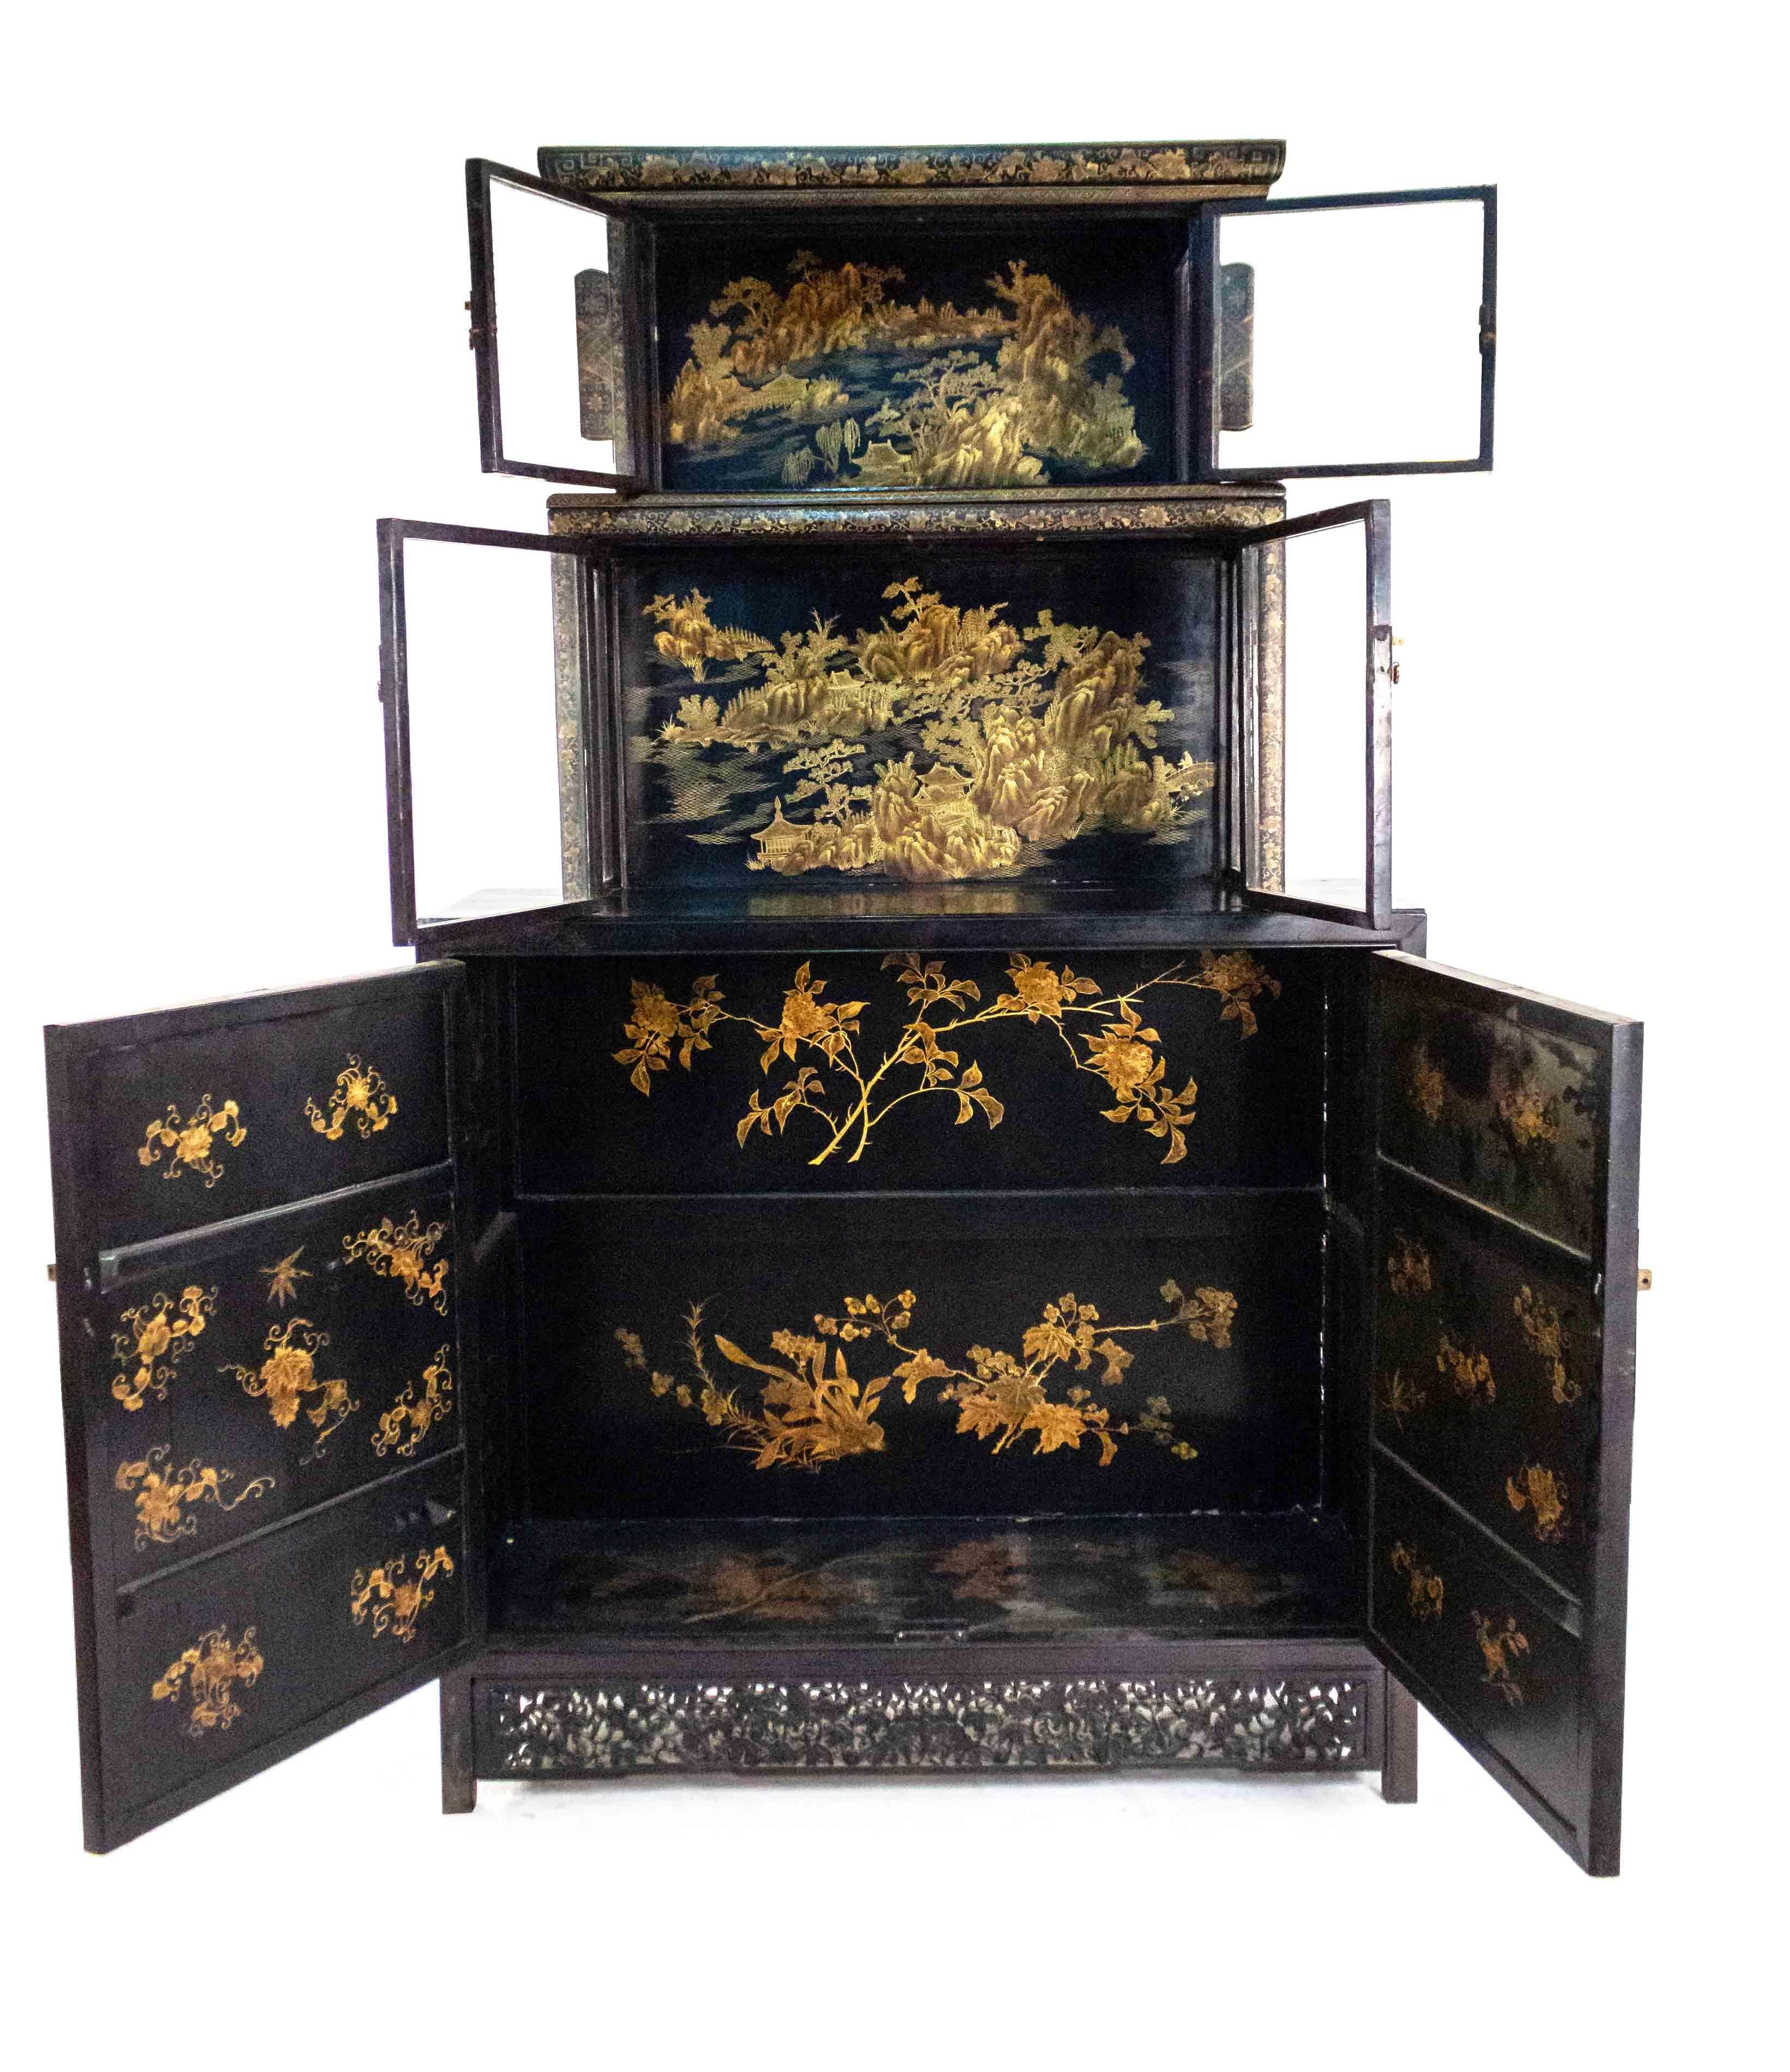 Pair of Chinese black lacquered three-tiered glass and wooden cabinets decorated with landscape scenes and carved borders with brass hardware and detailed interior ( Early 20th Century).